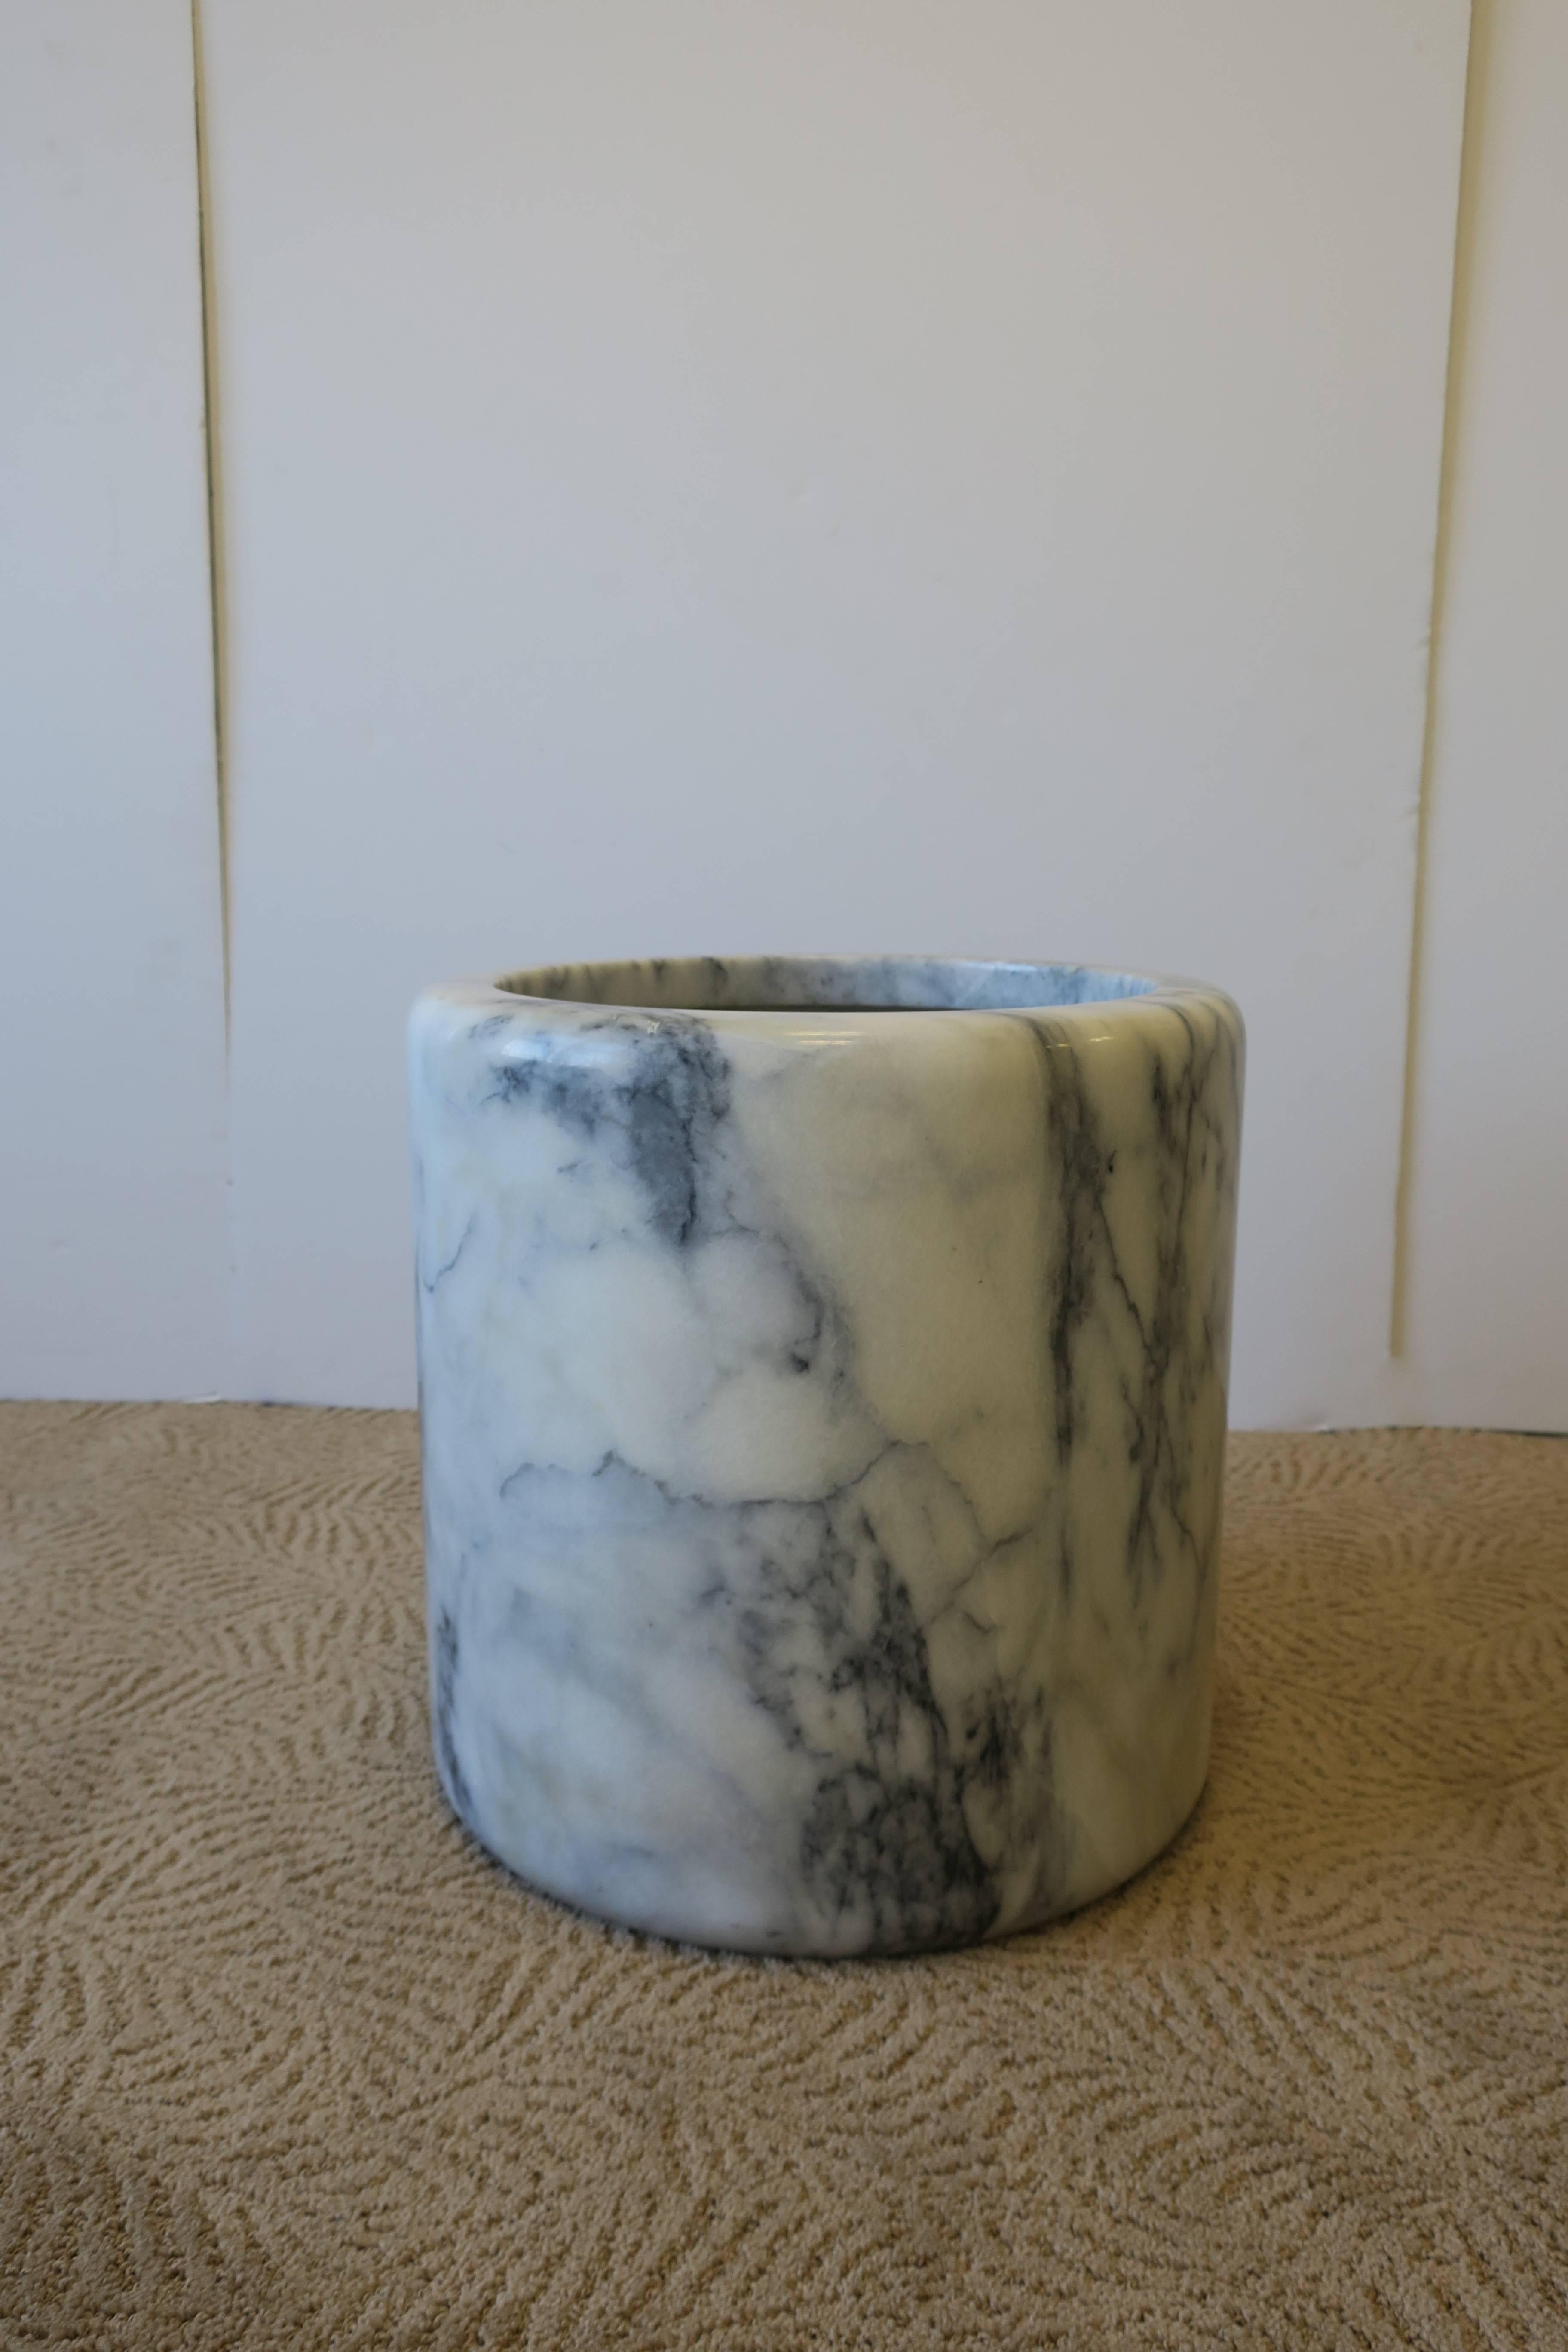 A substantial large minimalist marble vessel, cachepot (plant pot holder) or umbrella stand or holder. Marble is predominantly white with very dark blue or black veining. Marble is polished smooth with smooth rounded edge. Measurements include: